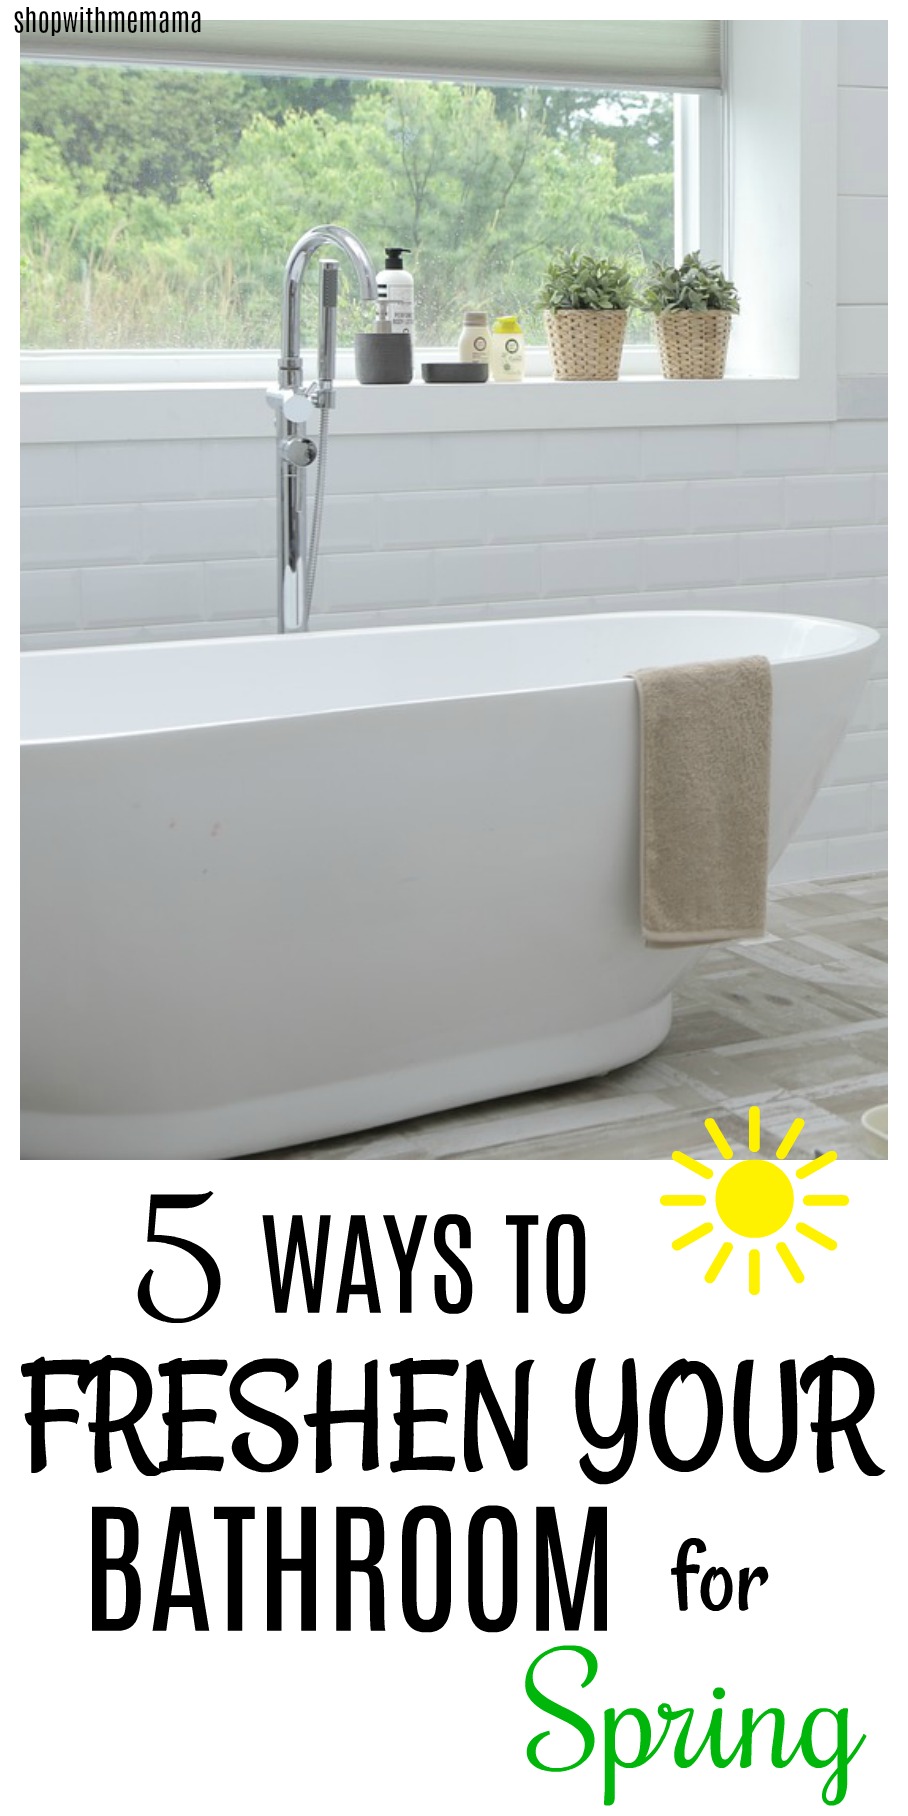 5 Ways To Freshen Your Bathroom For Spring